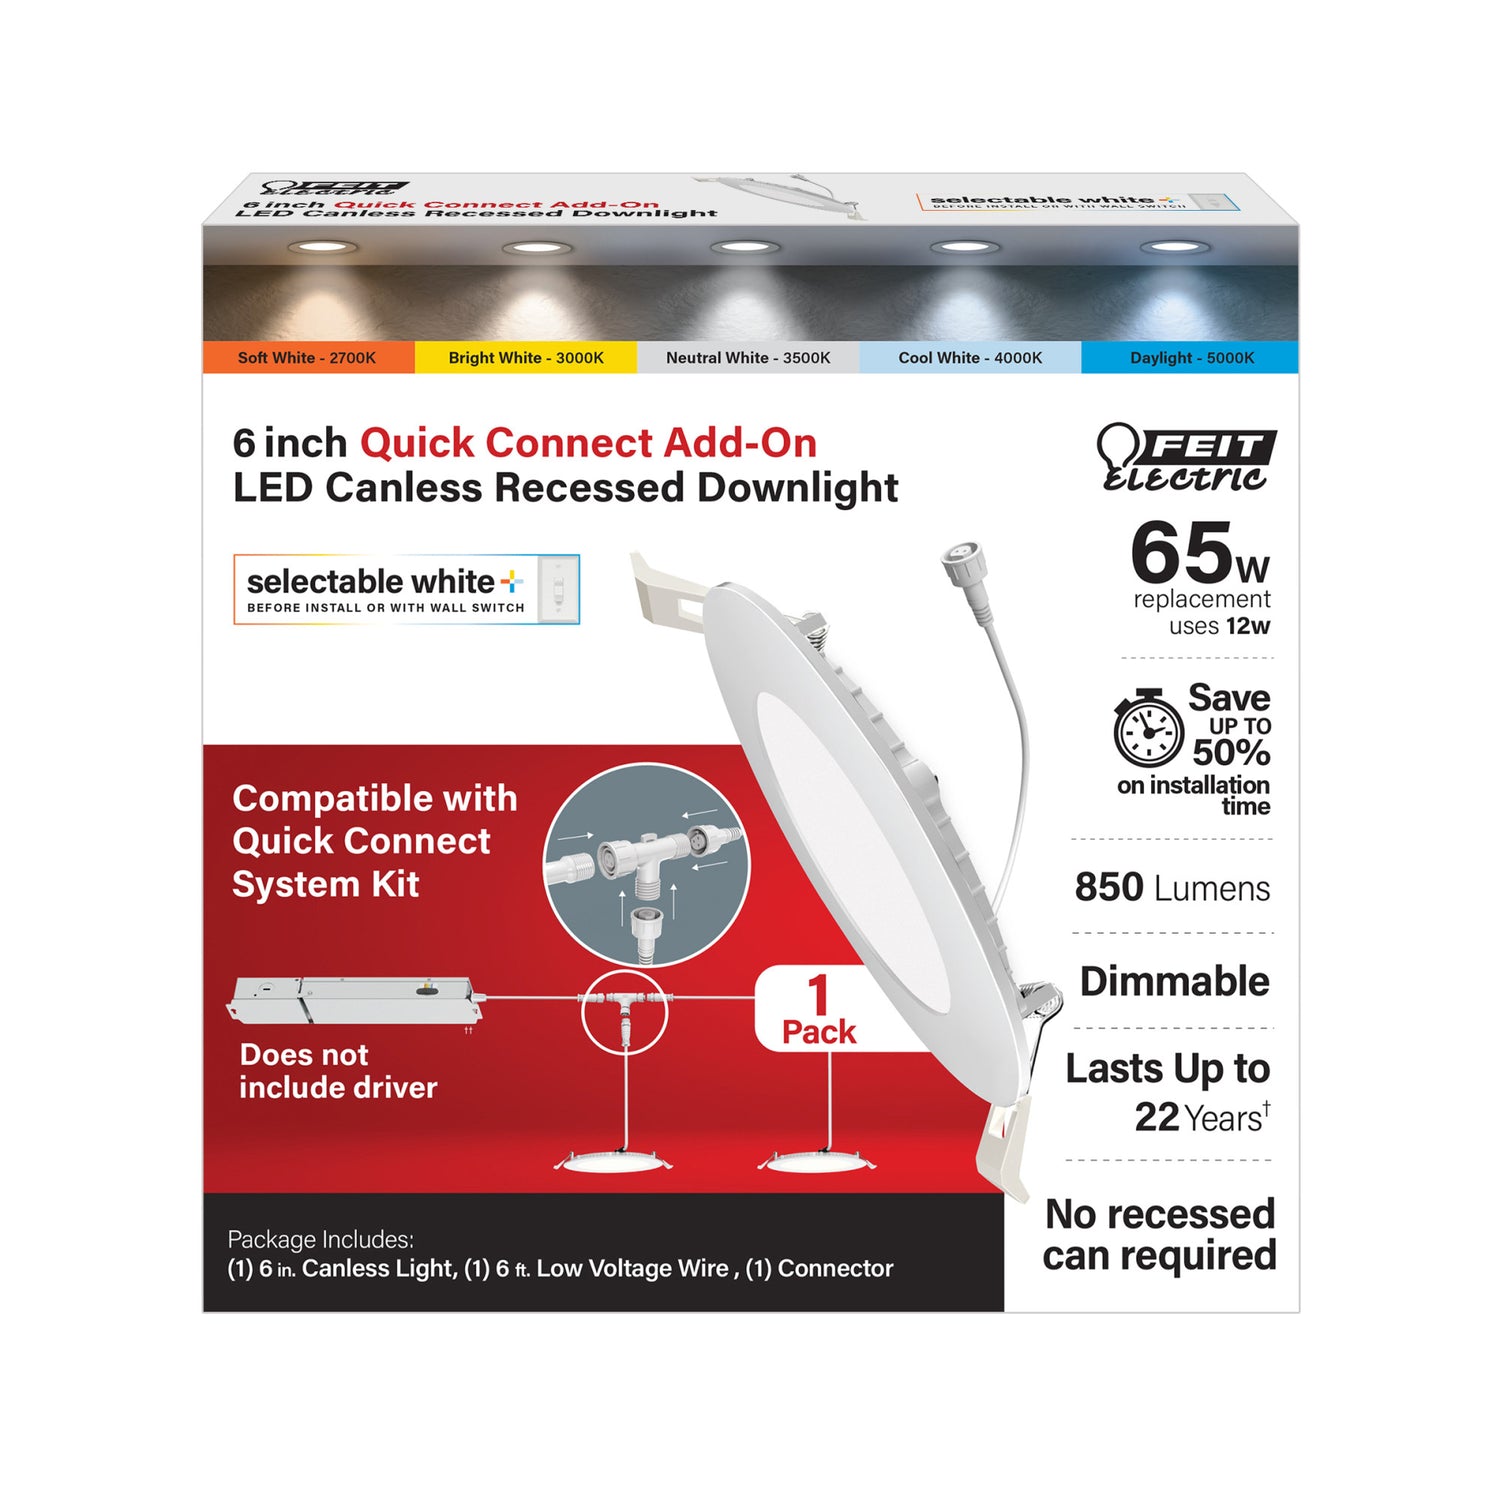 6 in. Quick Connect LED Canless Recessed Downlight Add-on